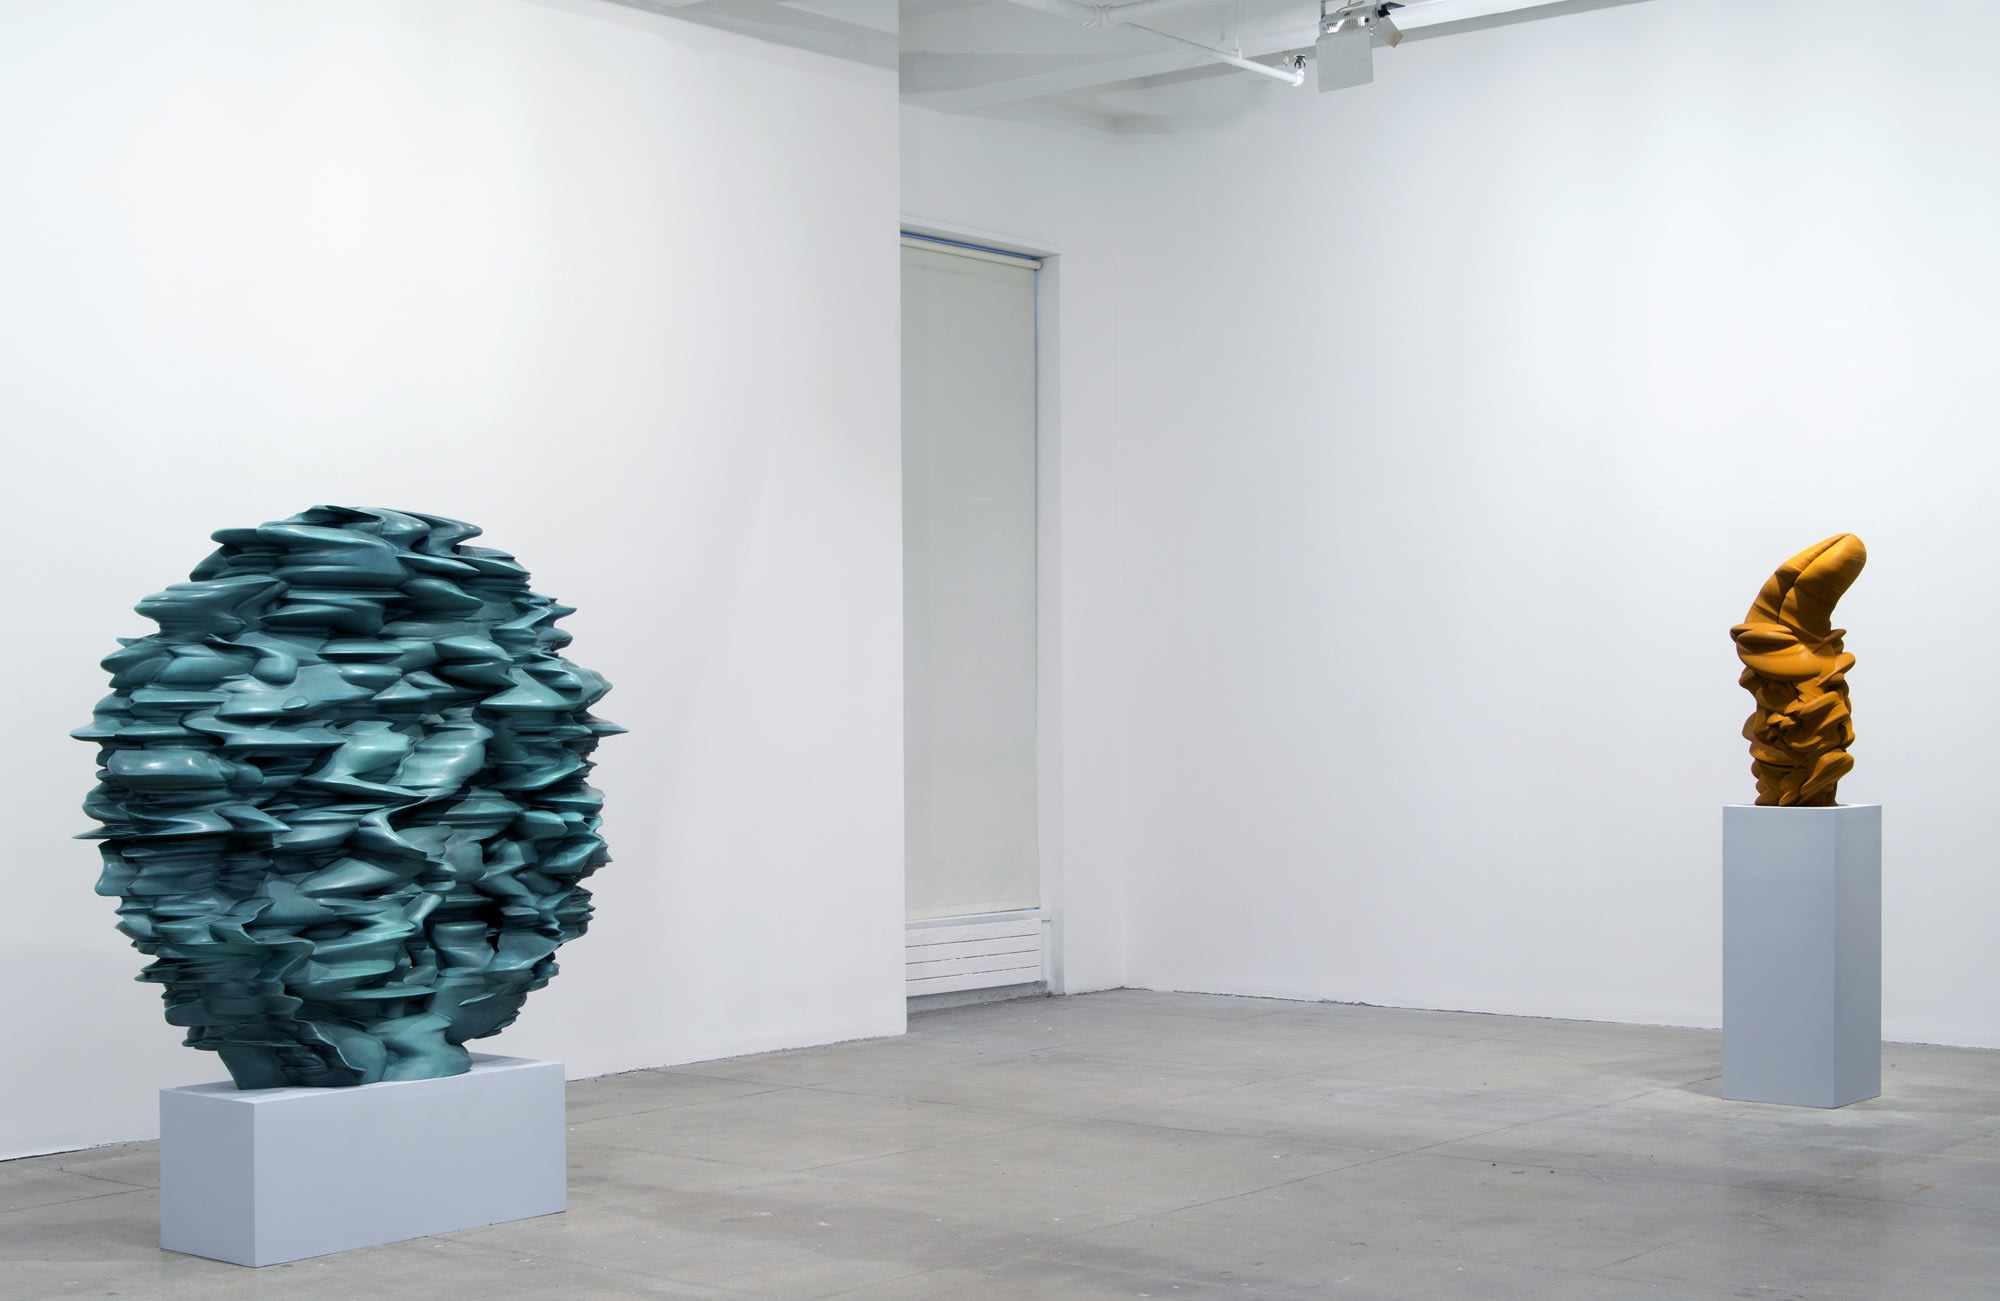 Two abstract sculptures sit on pedestals in a white room. The one on the left is spherical and light blue-green, while on the right the piece is vertical and orange-brown. 